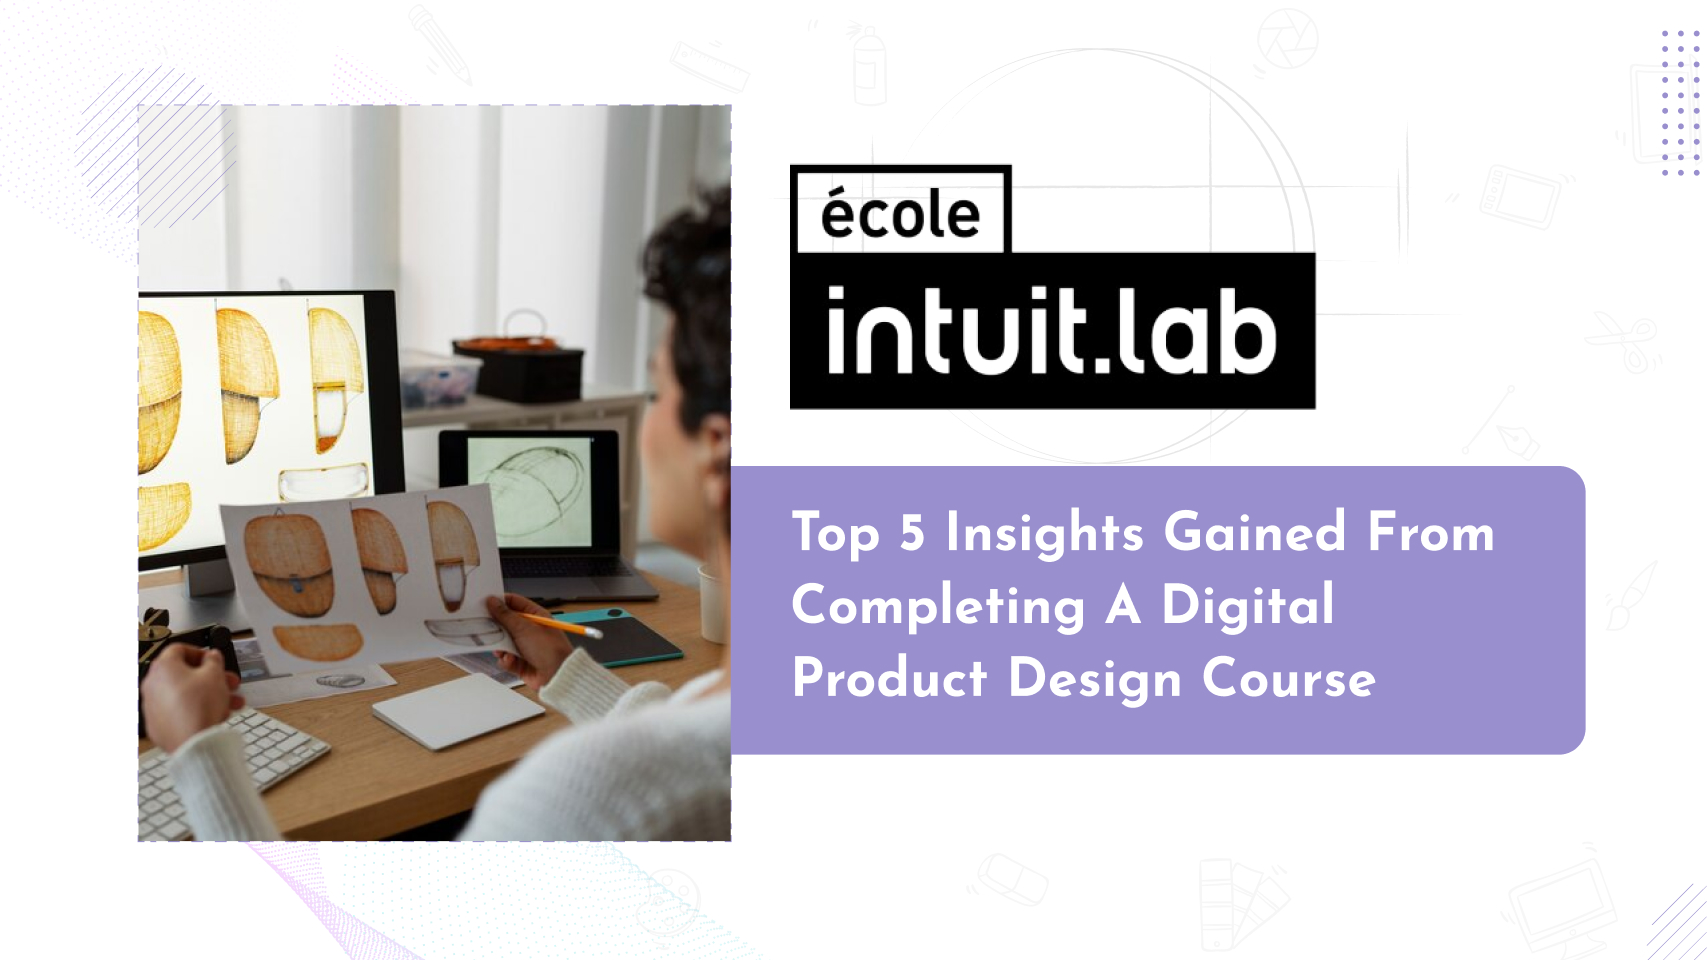 Top 5 Insights Gained from Completing a Digital Product Design Course